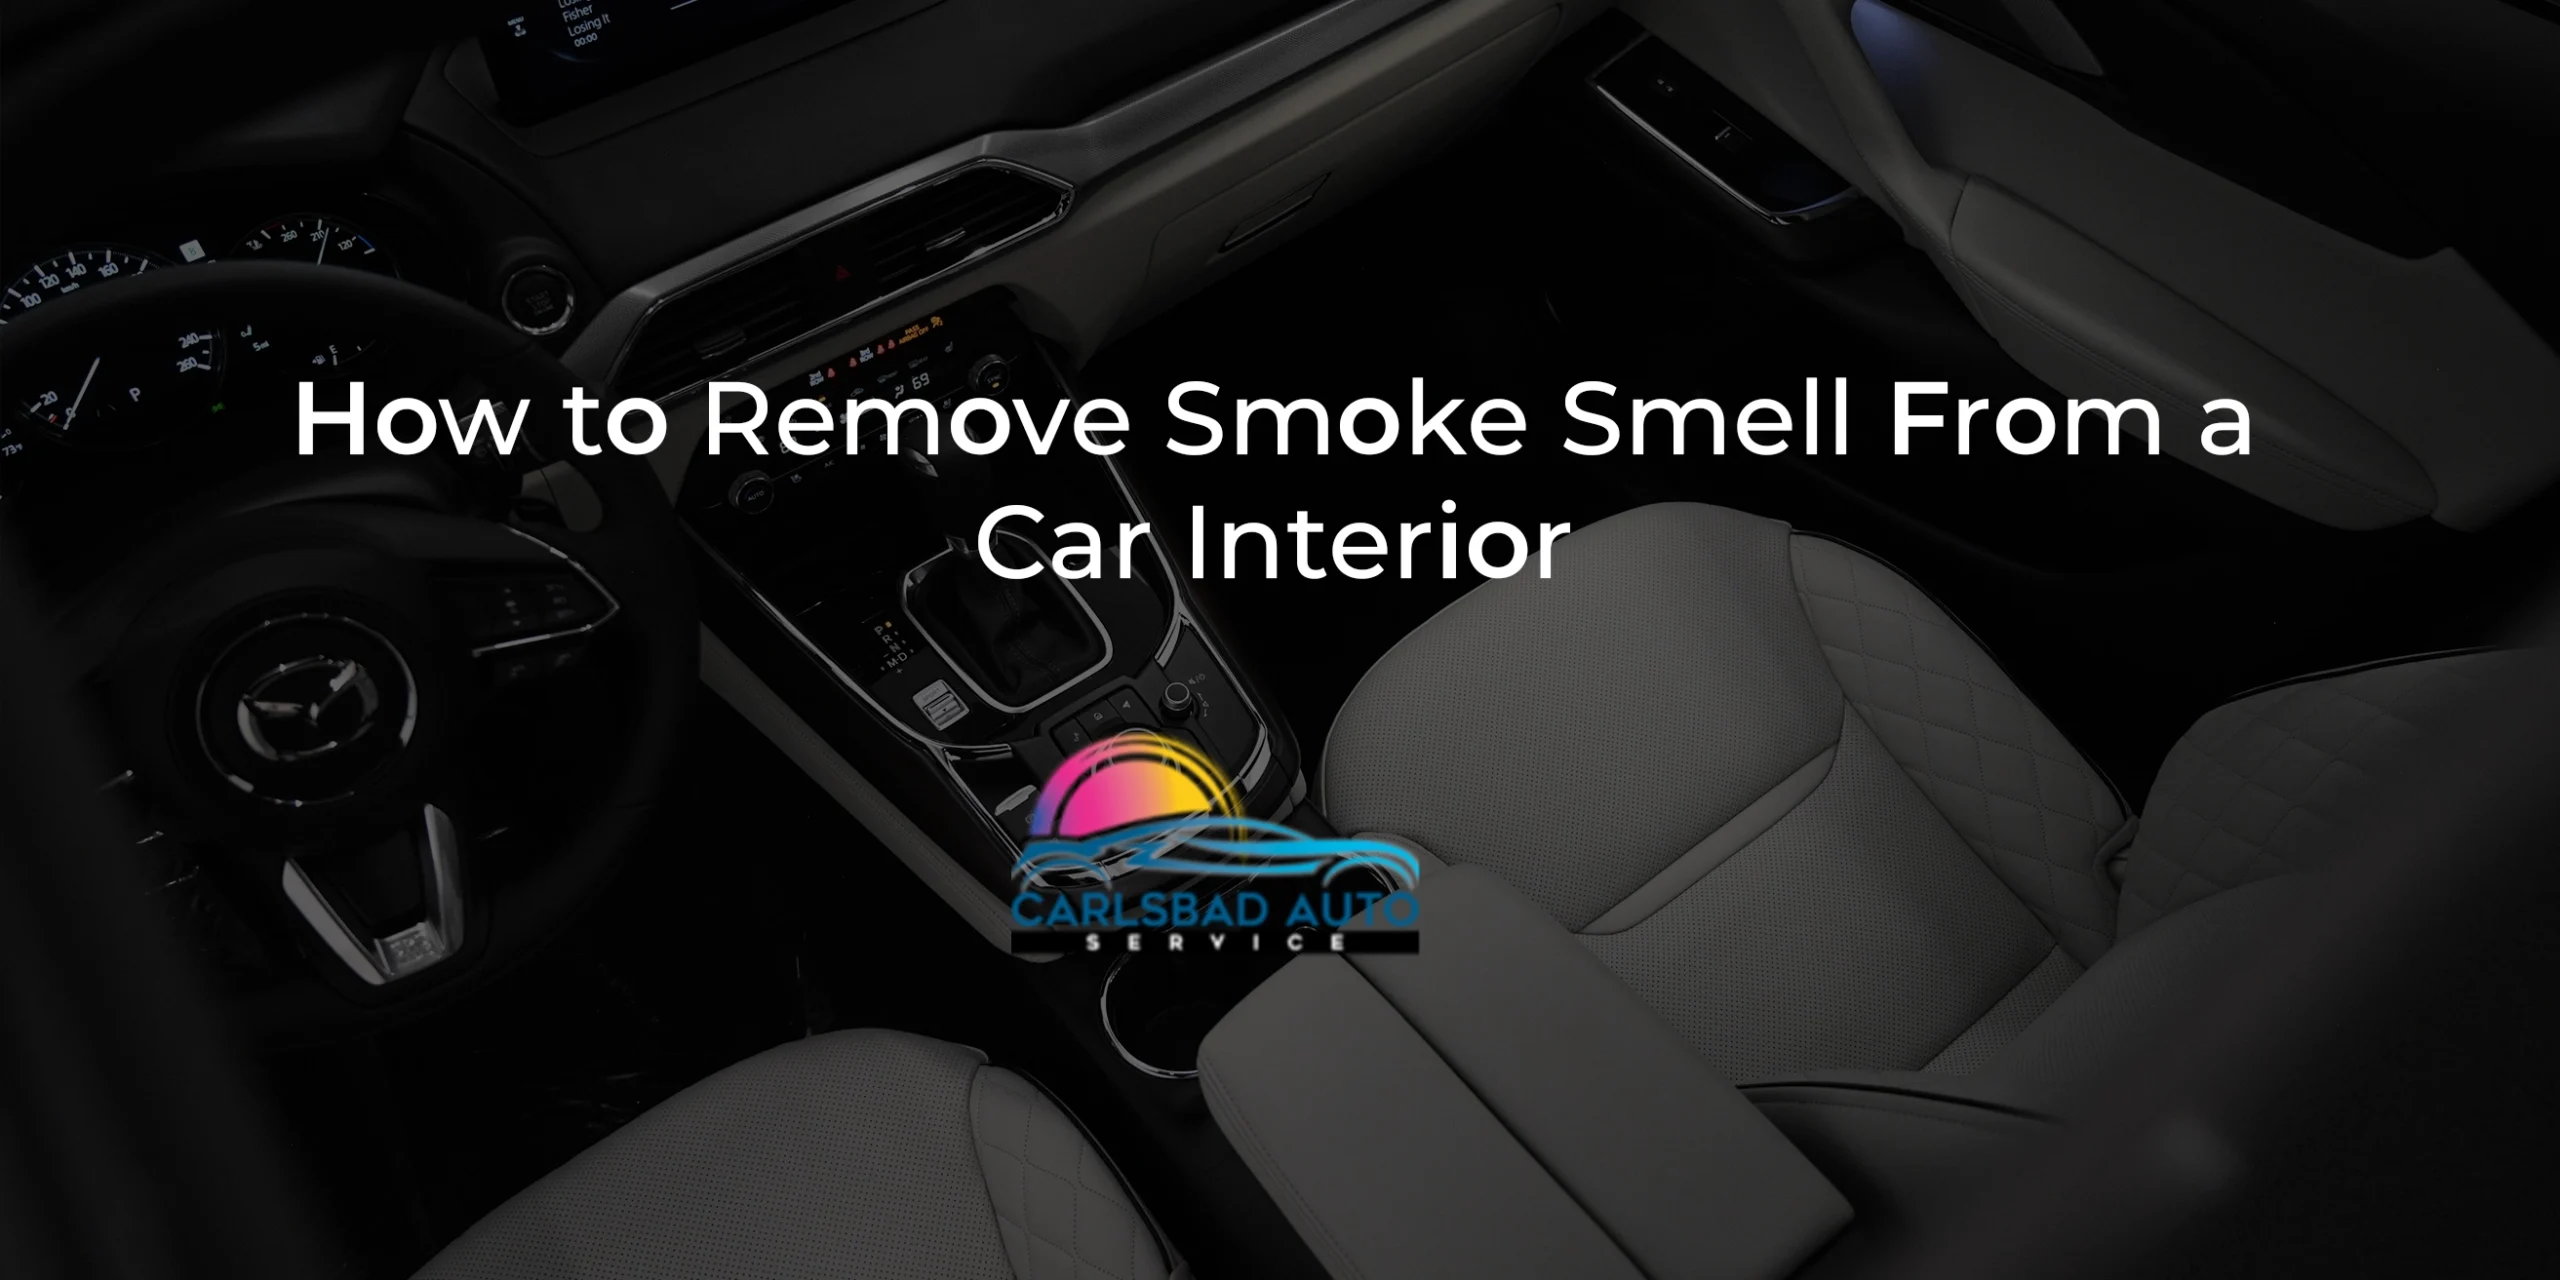 How to Remove Smoke Smell From a Car Interior